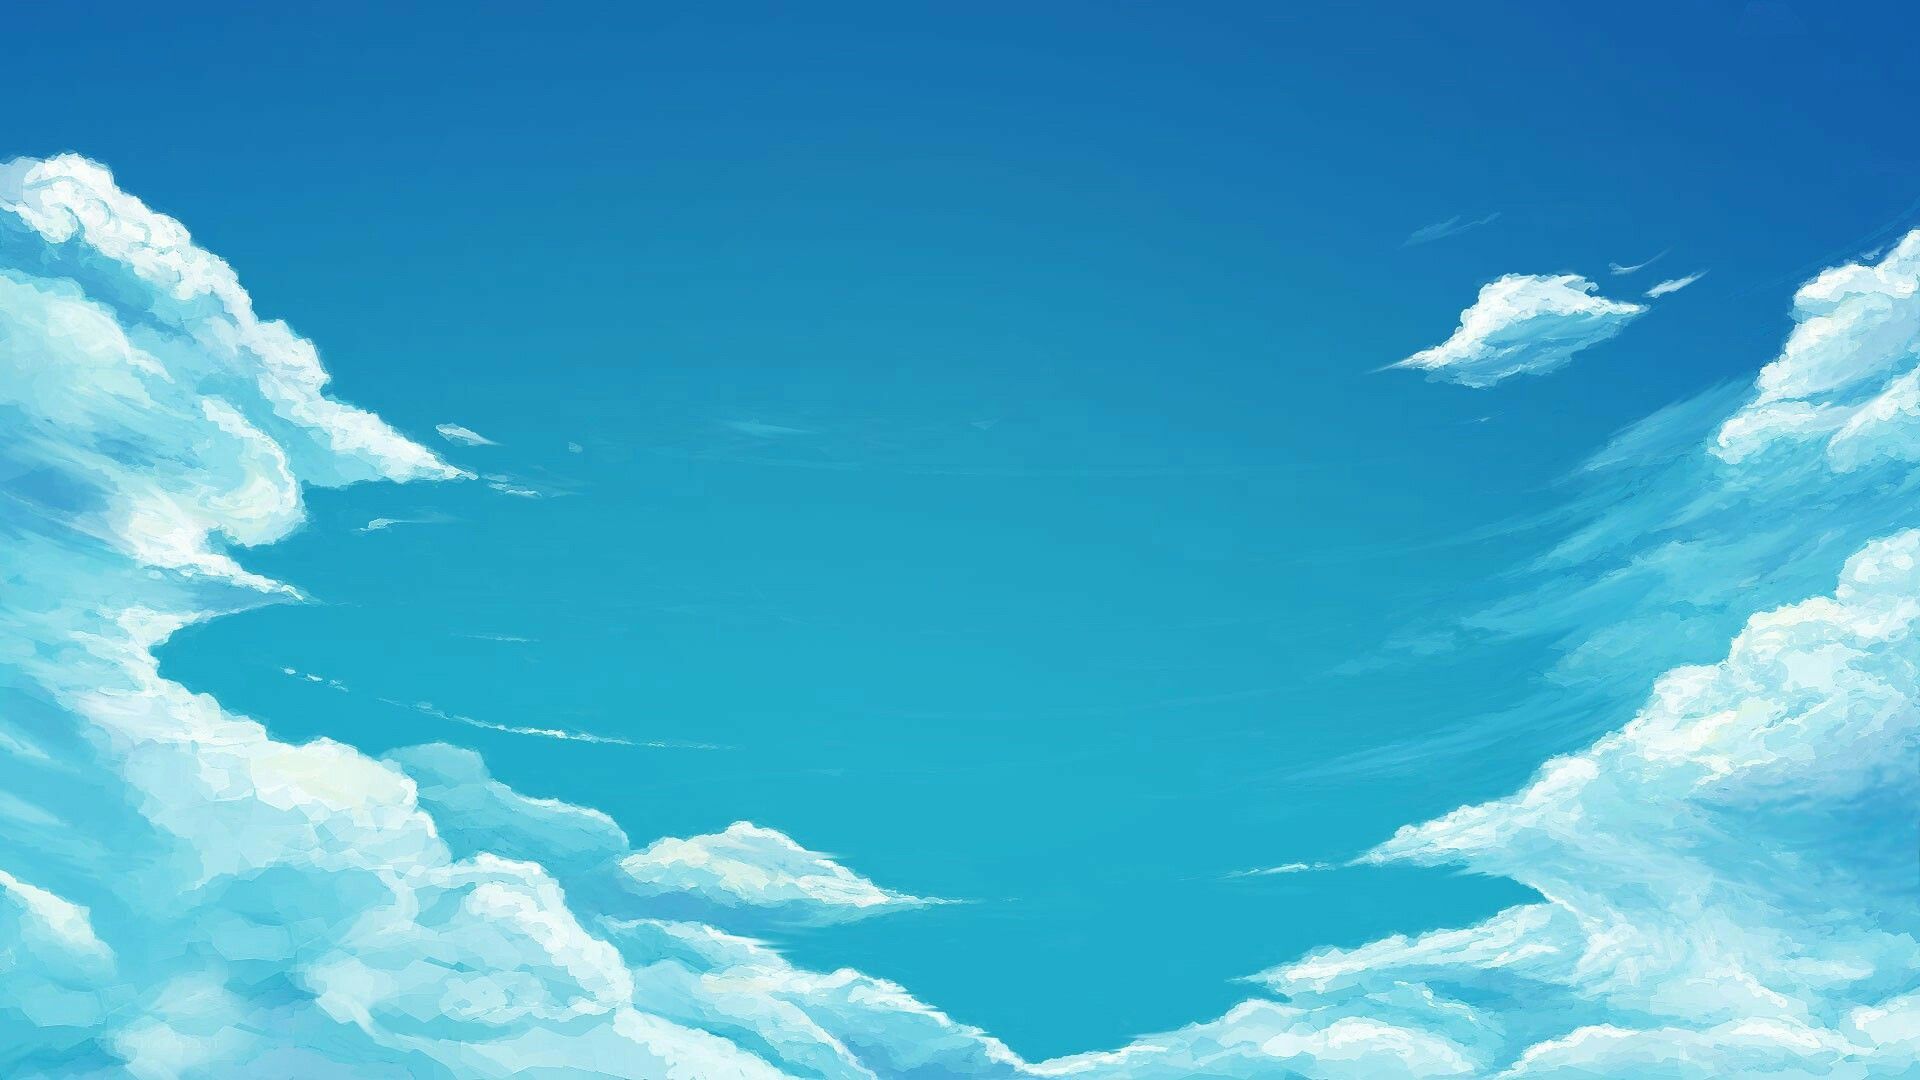 11,111 Anime Sky Background Images, Stock Photos & Vectors | Shutterstock